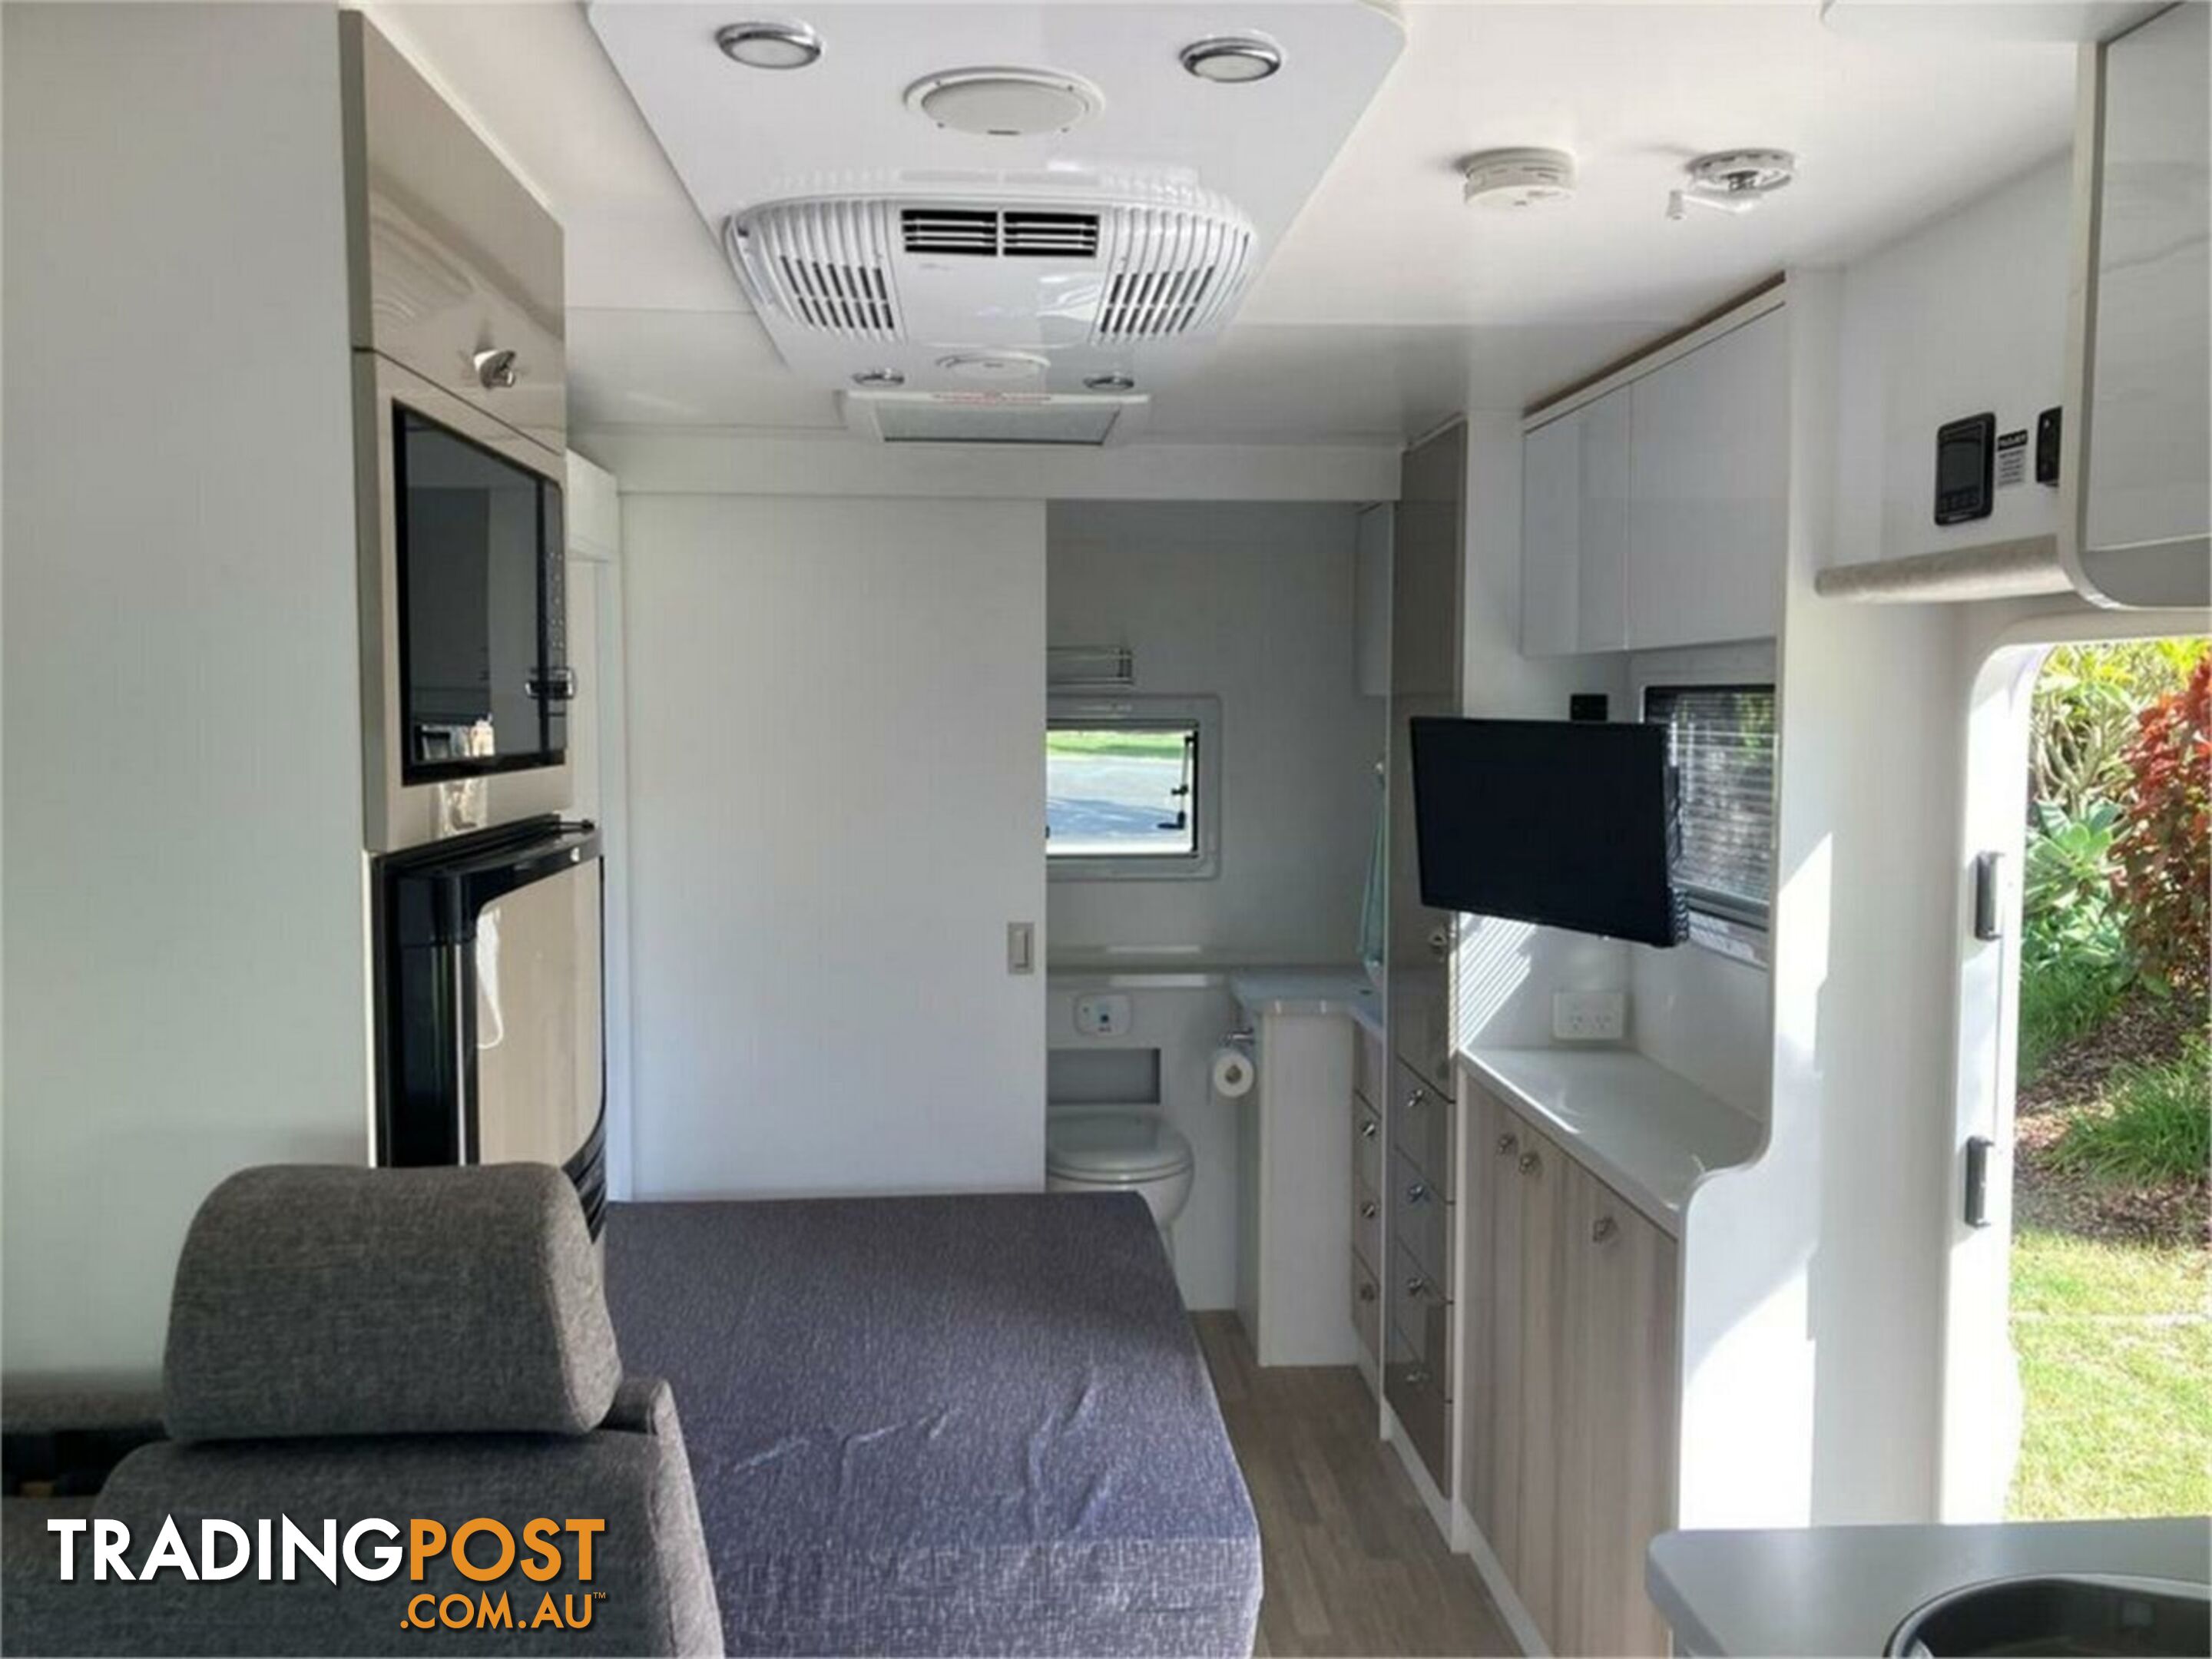 2021 Sunliner Switch S442 Motor Home